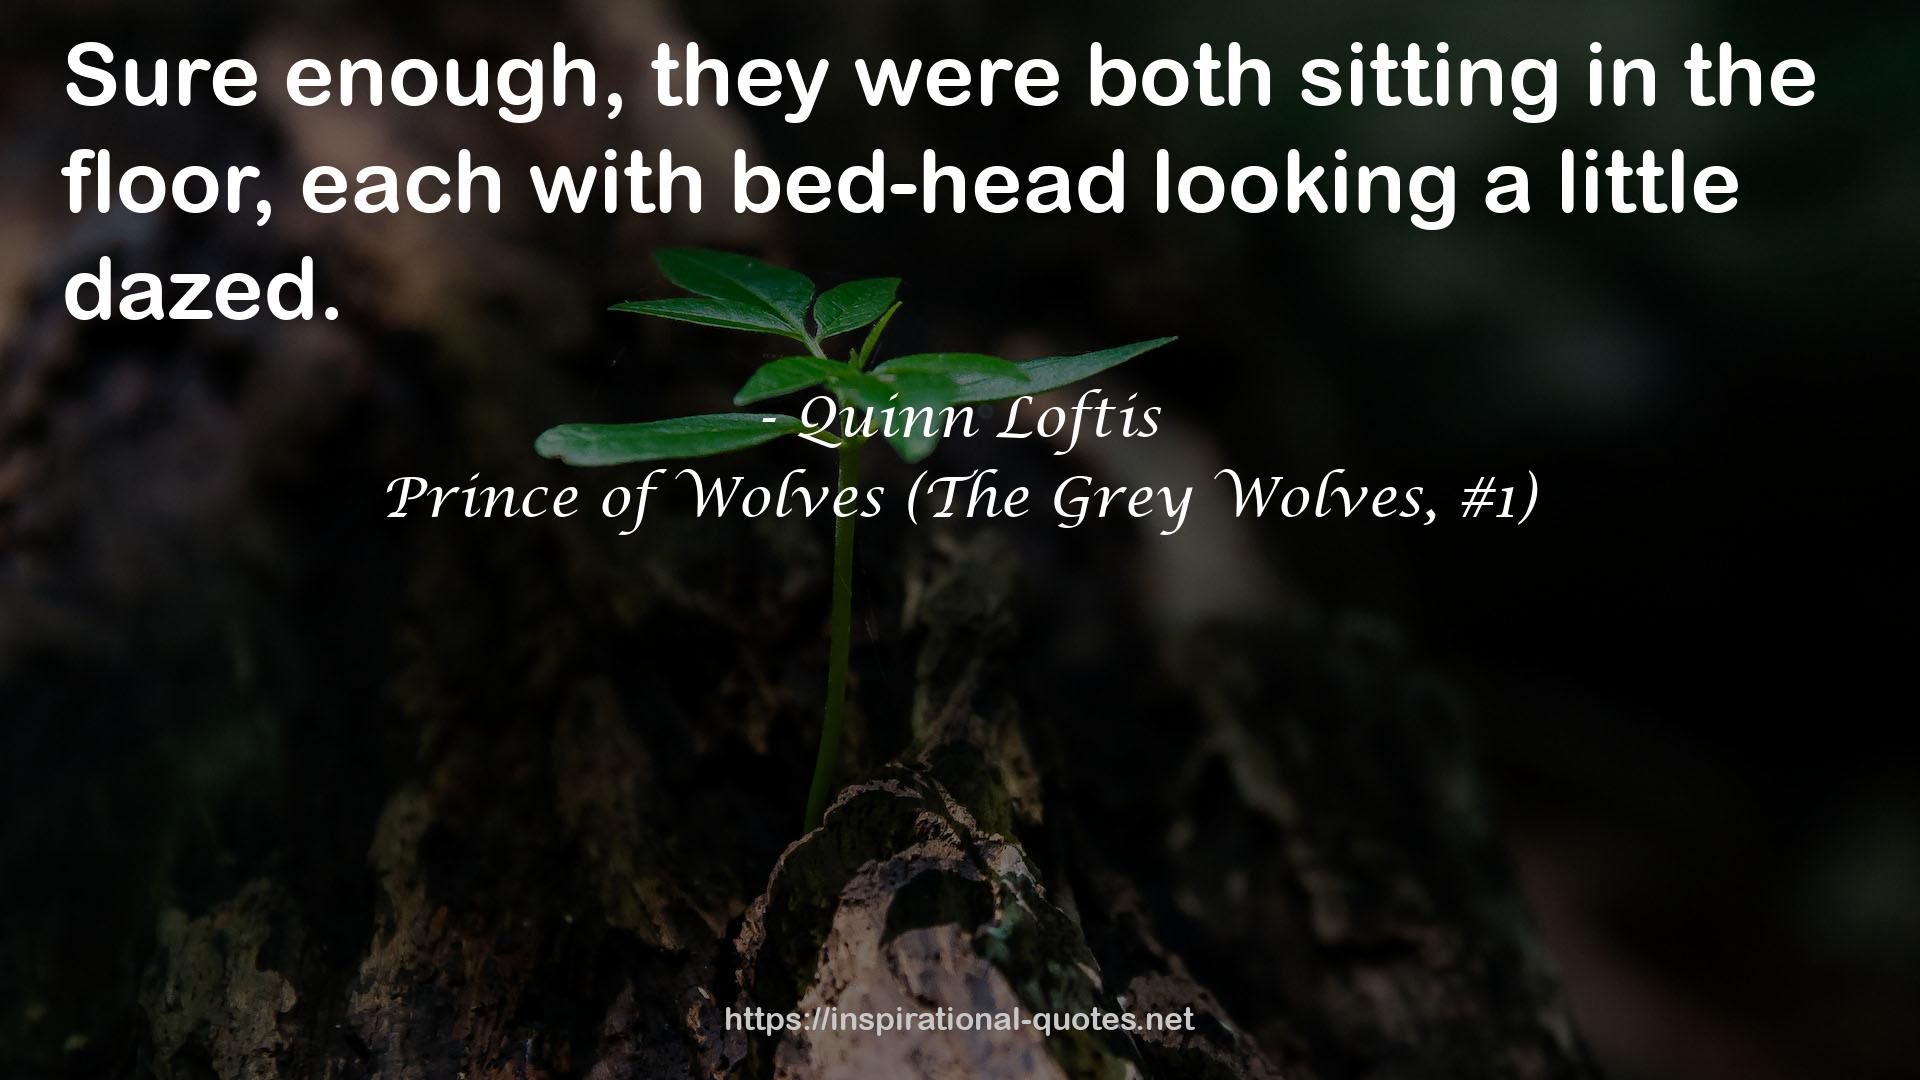 Prince of Wolves (The Grey Wolves, #1) QUOTES